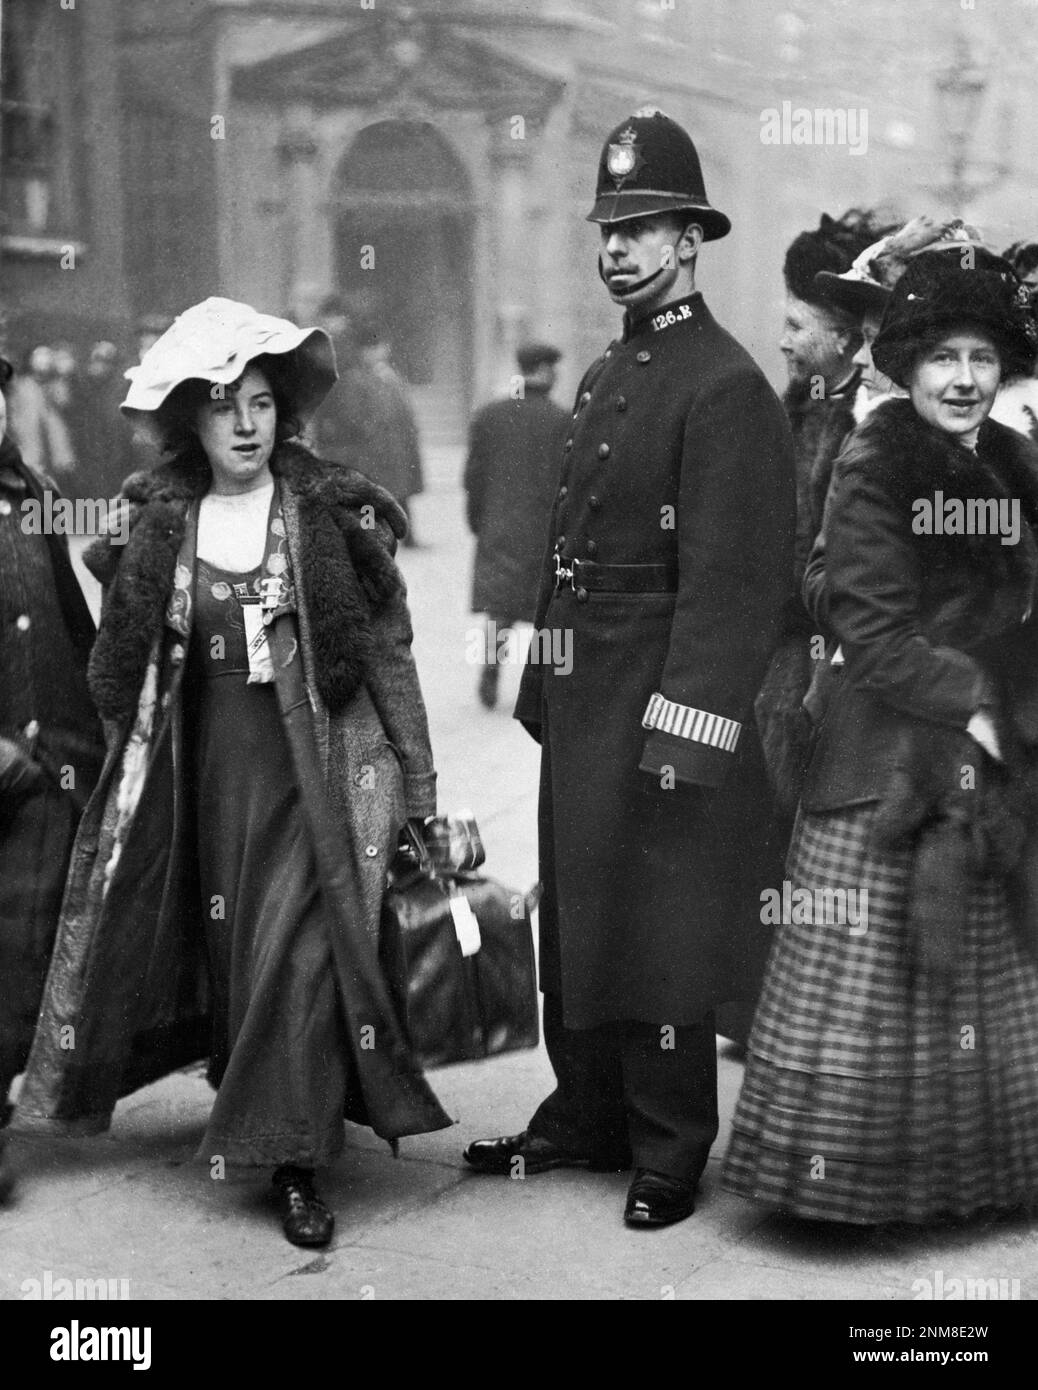 Johnny Cyprus - Suffragette Mabel Capper outside of Bow Street Court after arrest - 1912. Stock Photo